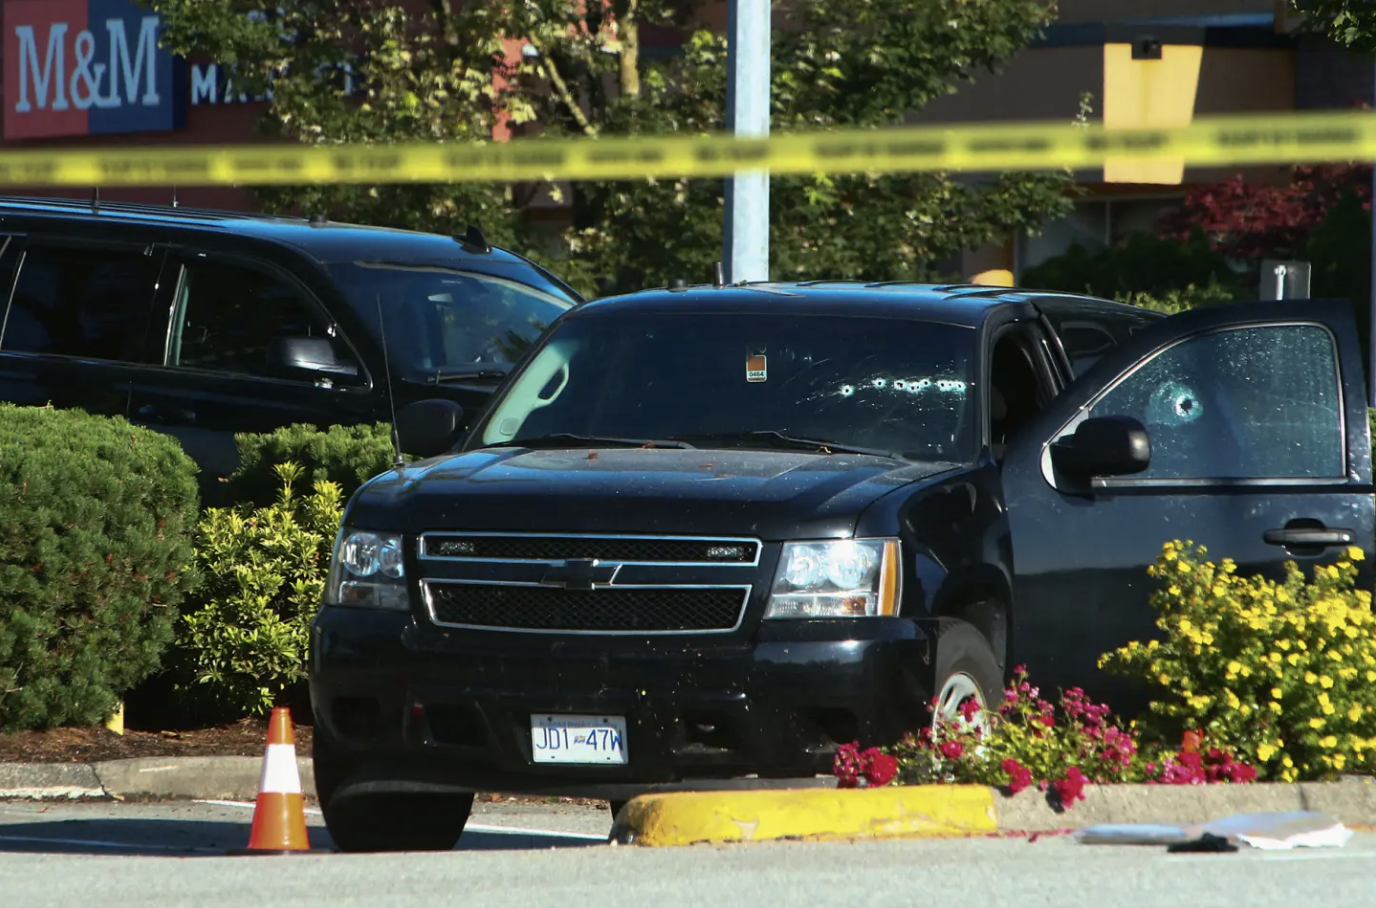 Langley Shooting Update: Three people dead, including suspect